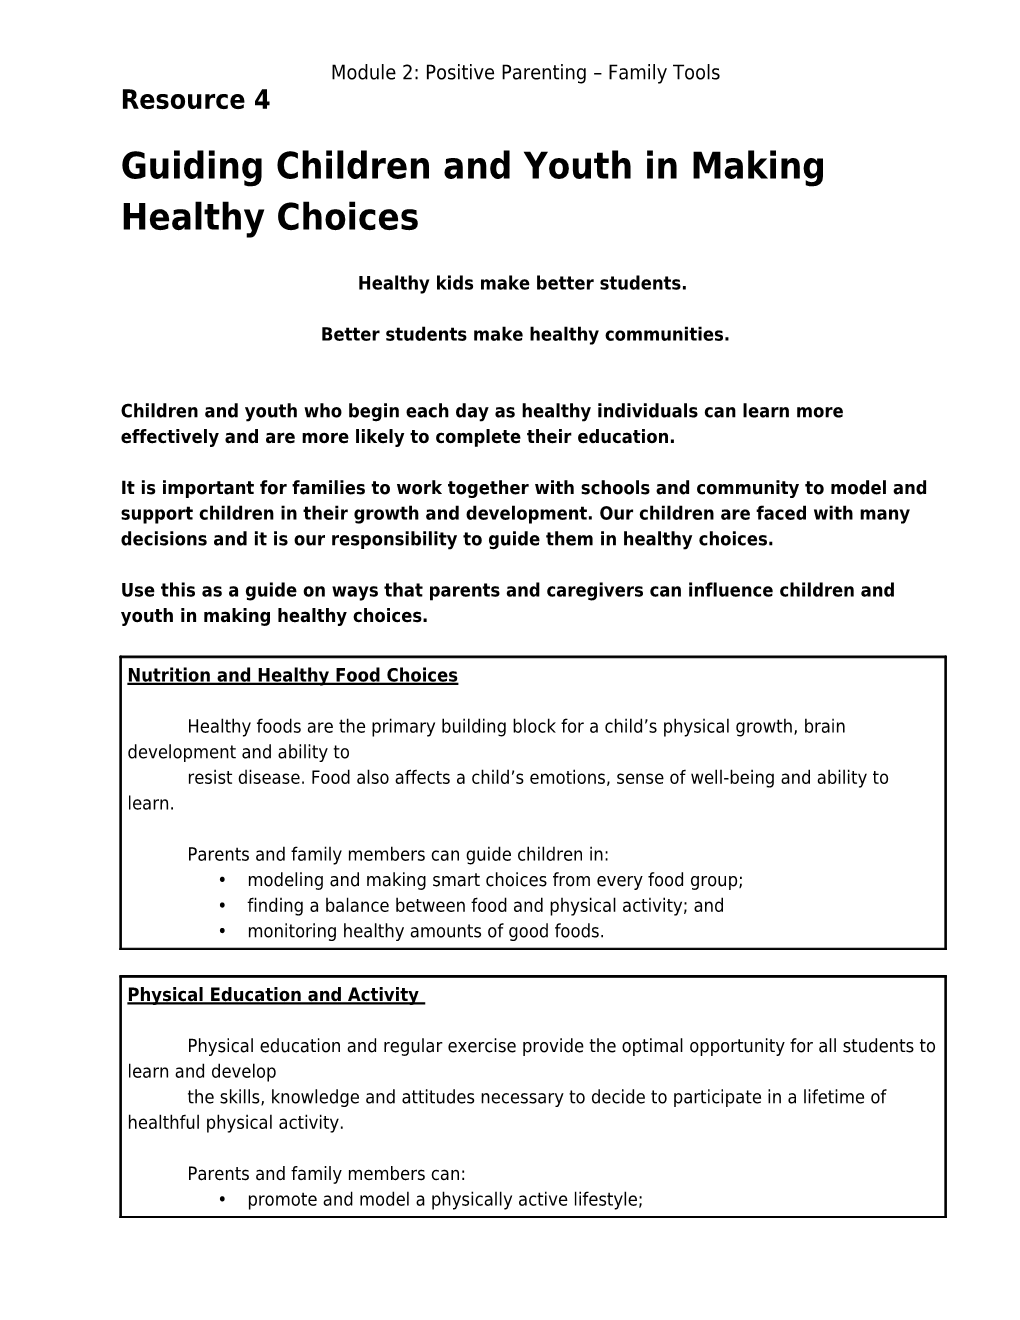 Guiding Children and Youth in Making Healthy Choices